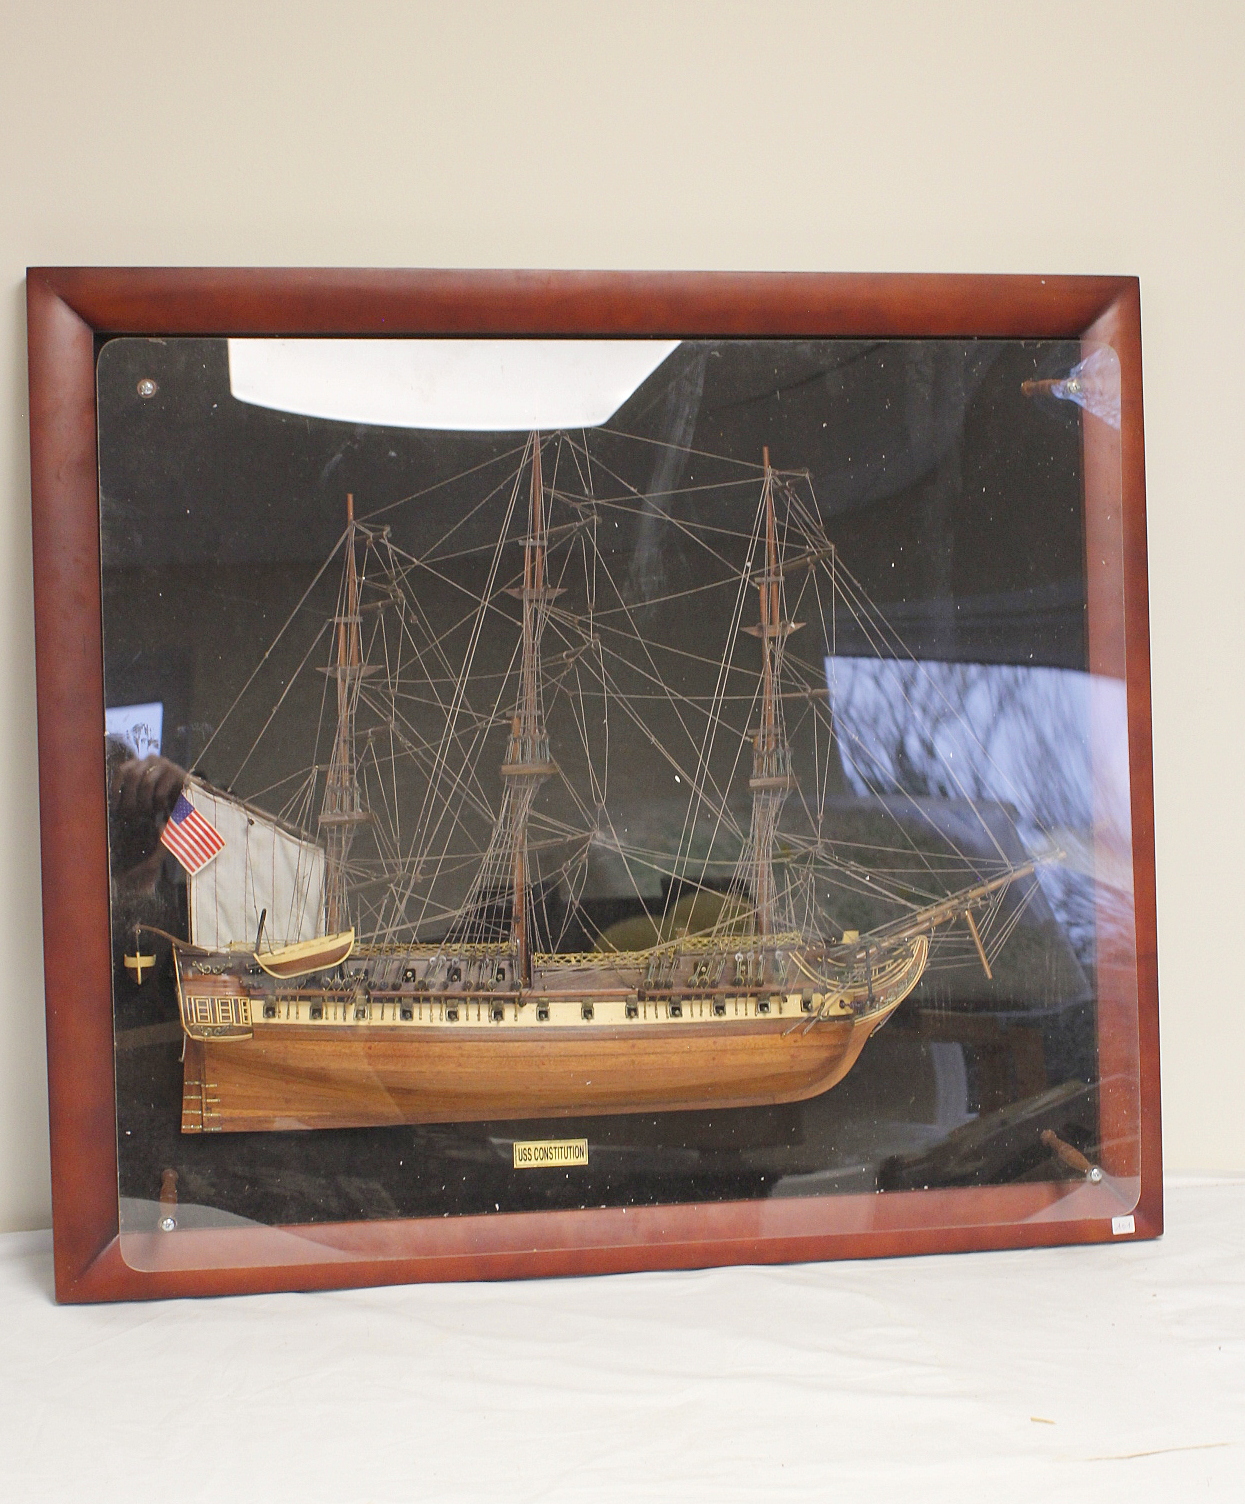 Large framed model of the ship USS Constitution.